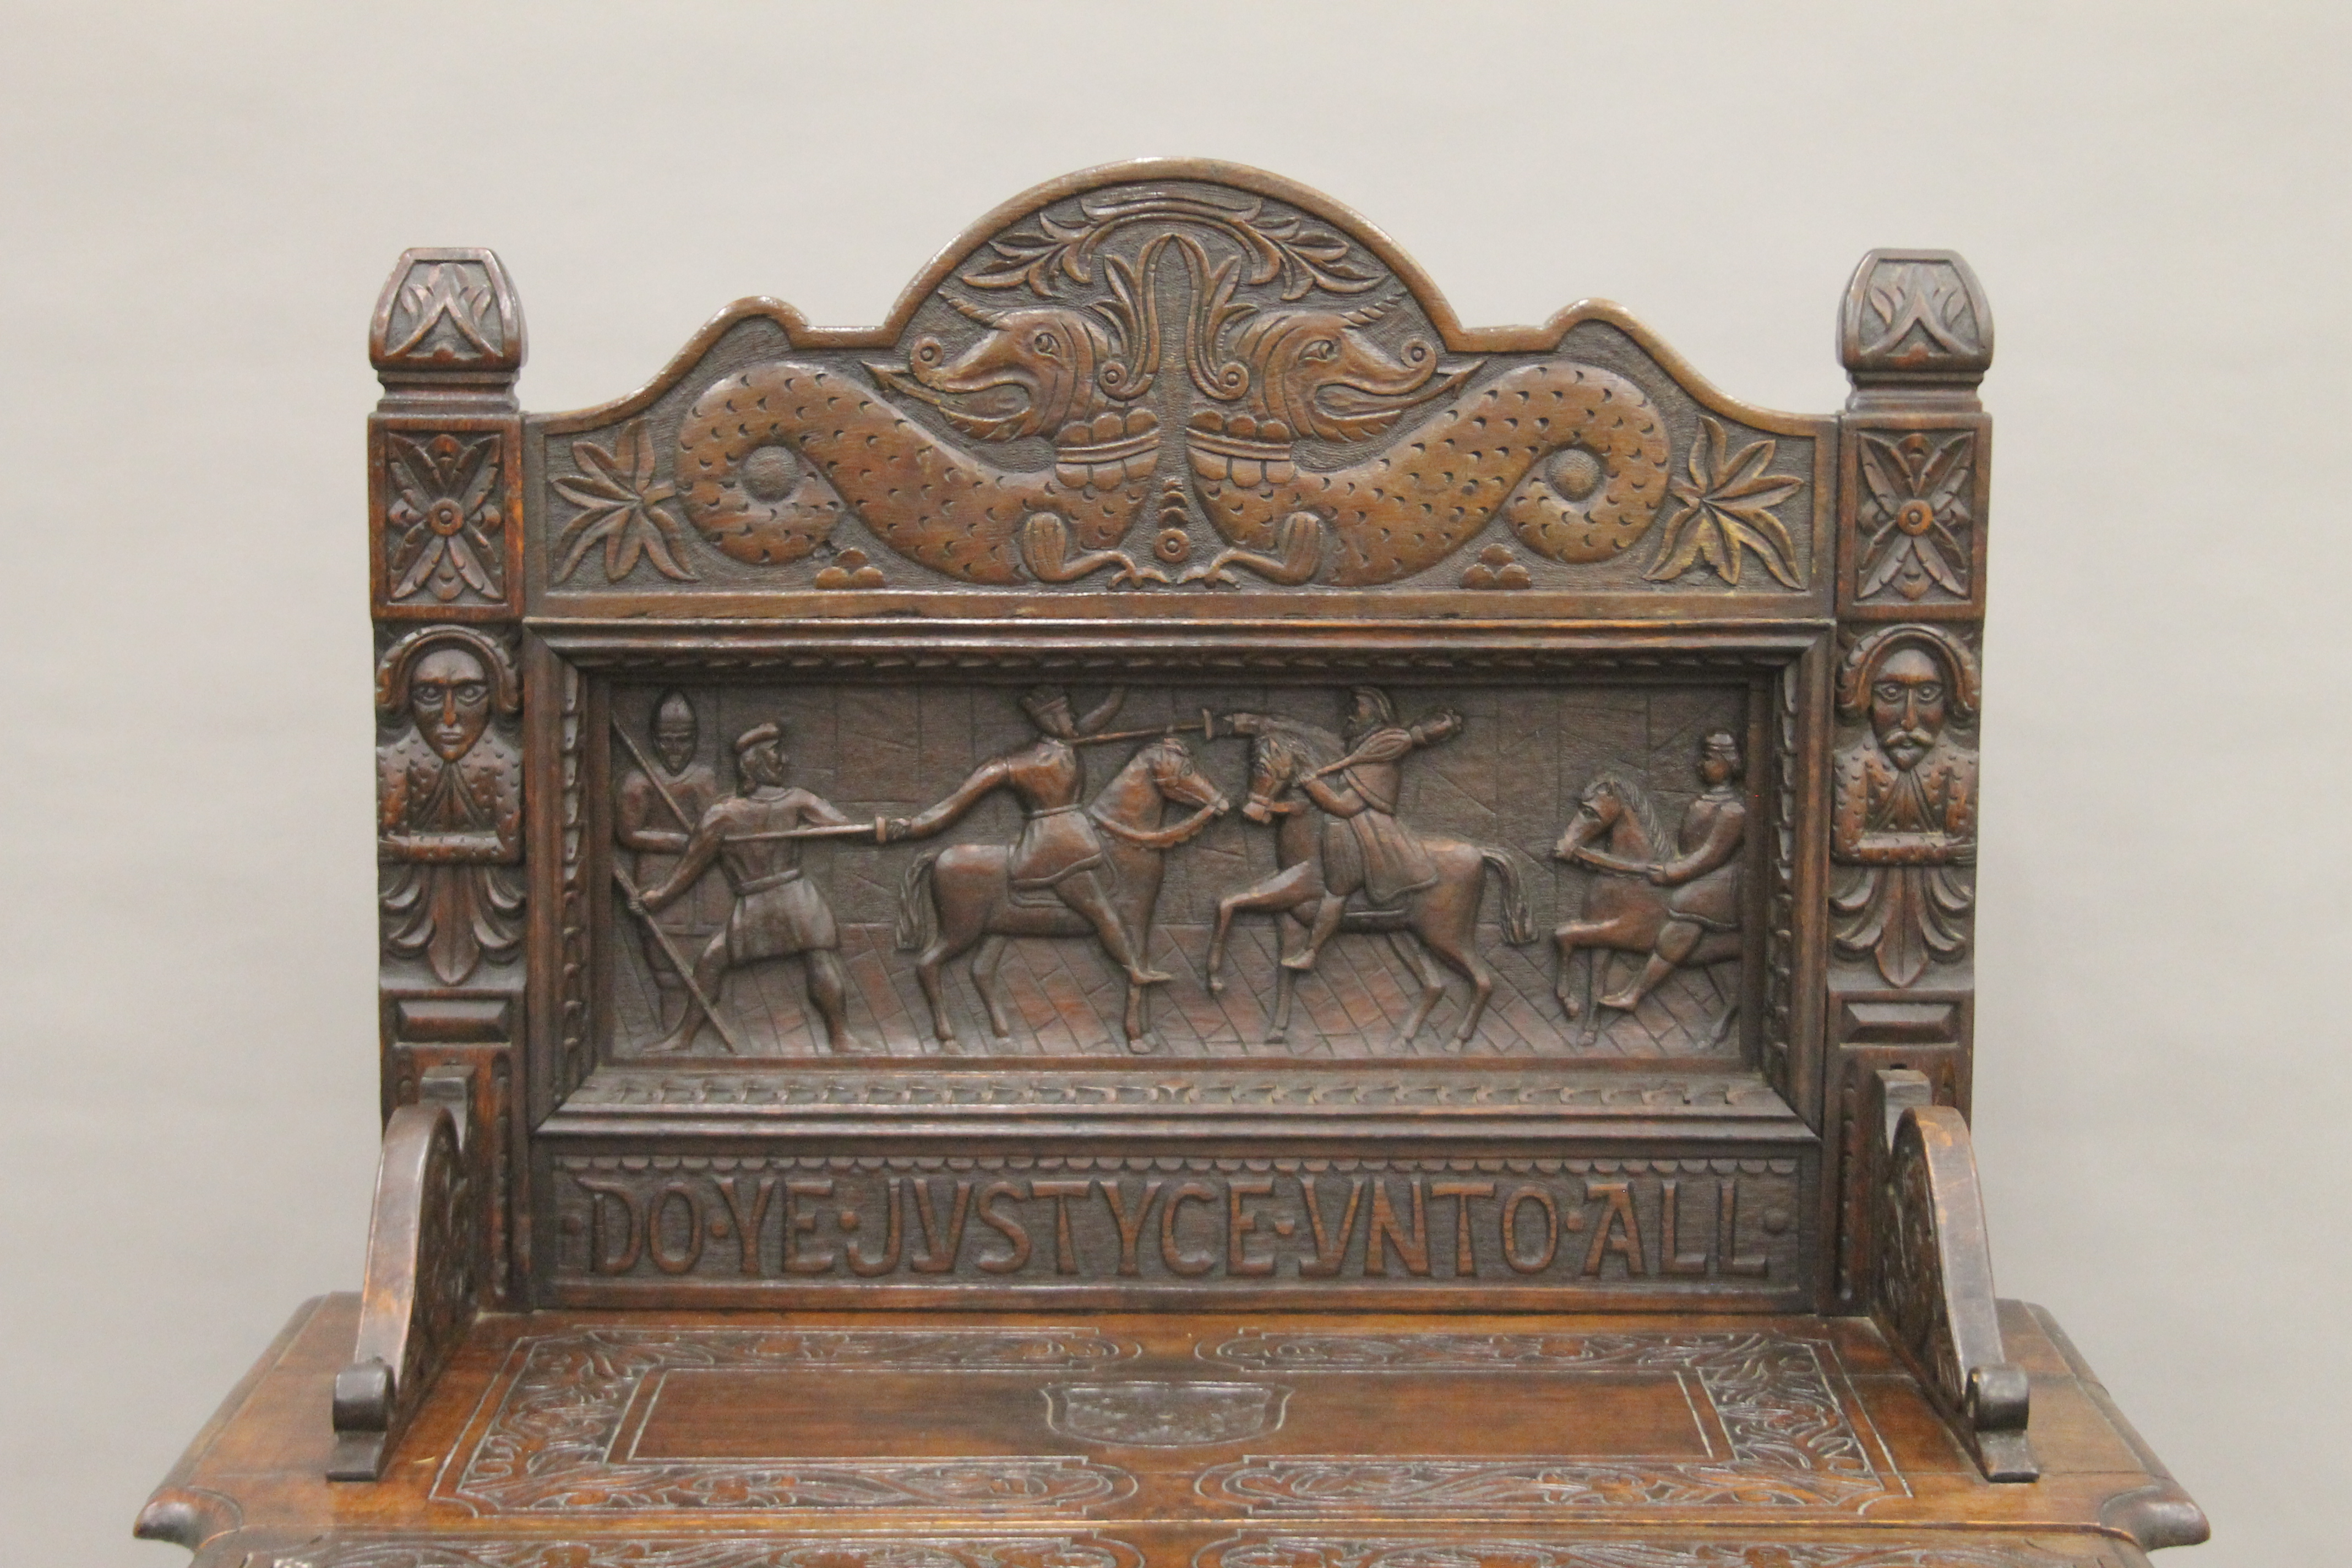 A carved oak single flap side table, the back carved with a scene titled Do Ye Justyce Unto All. - Image 4 of 8